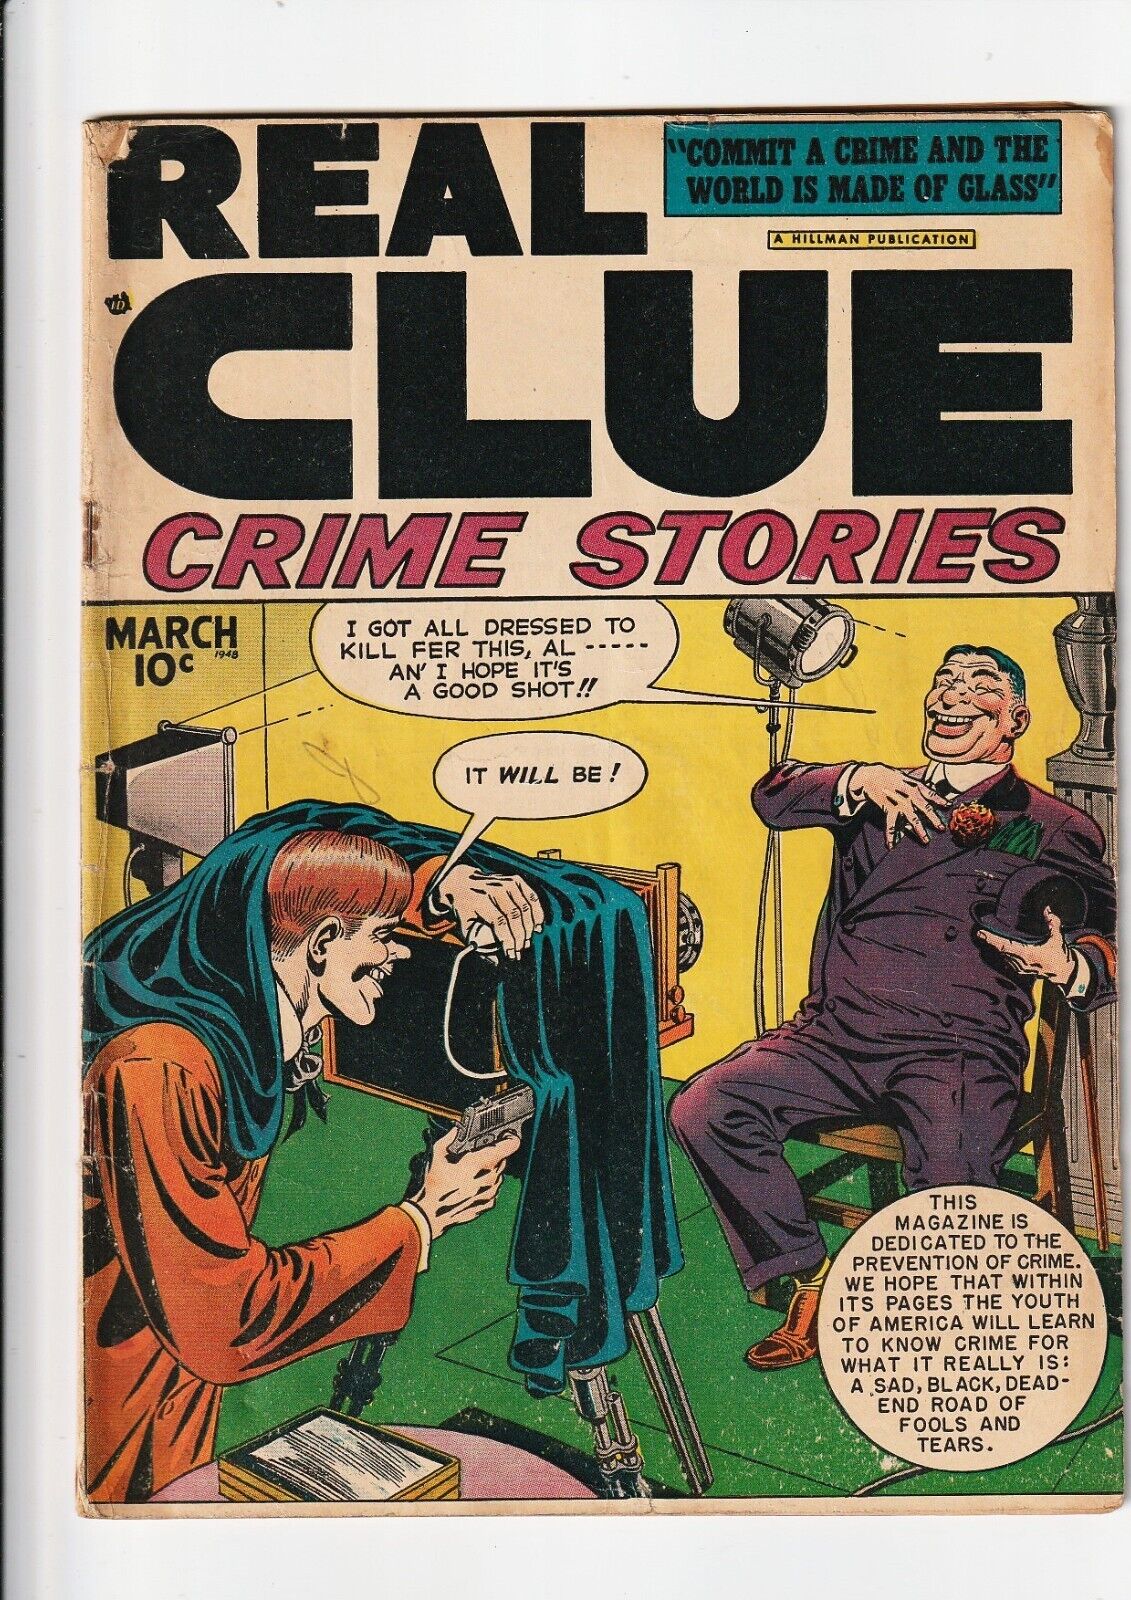 Real Clue Crime Stories Vol. 3 #1 1948 1st Print NICE